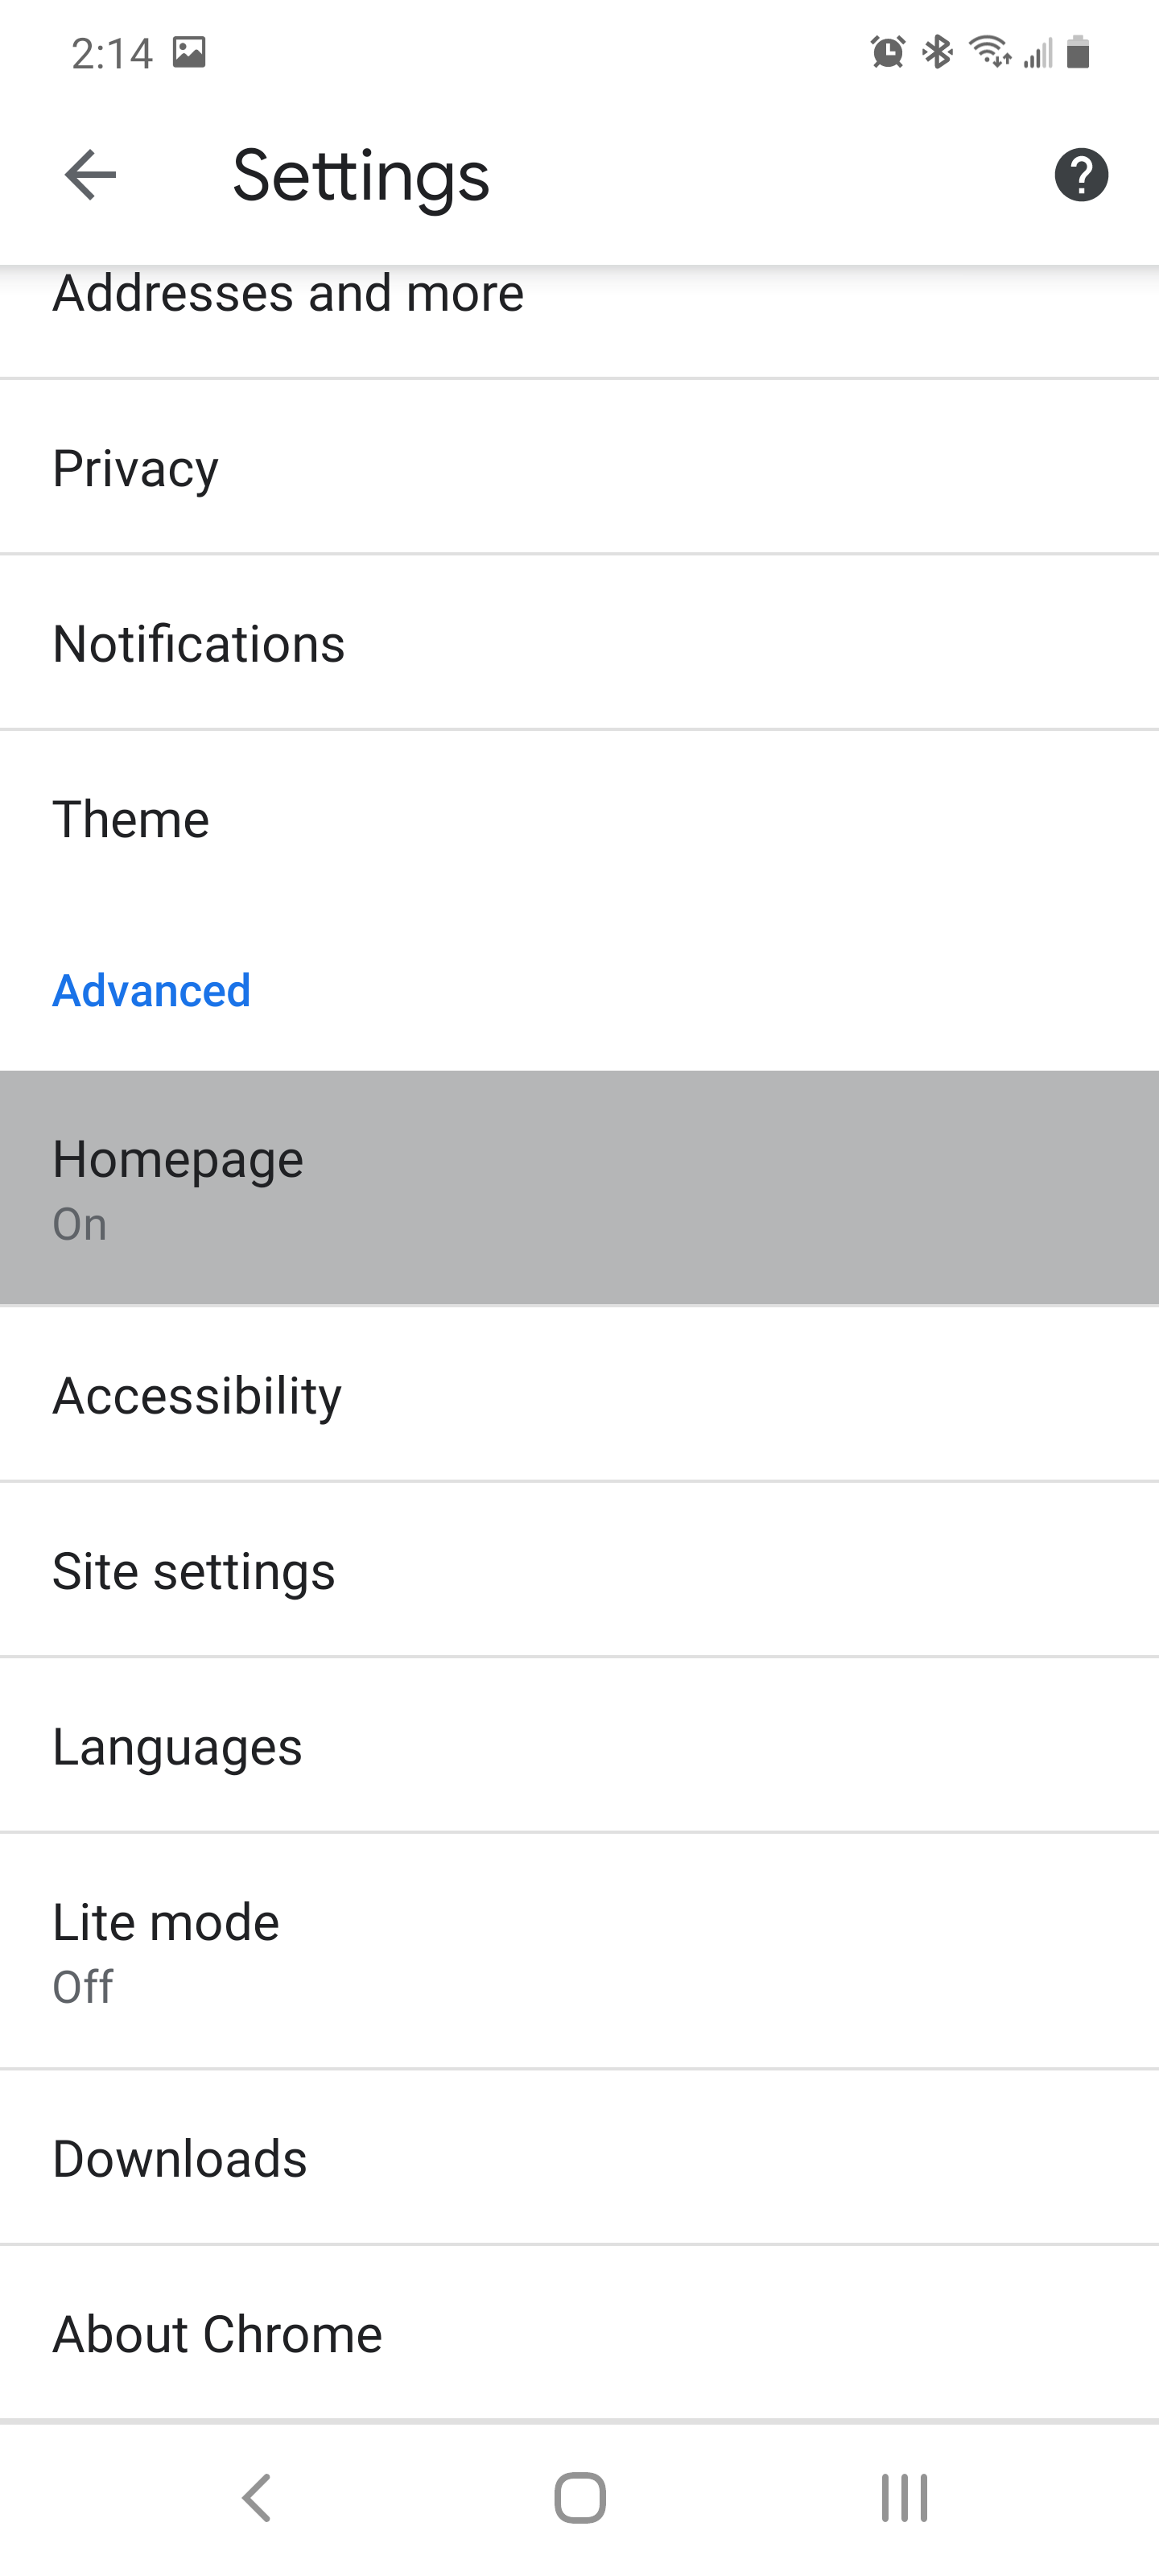 The Settings section of the Google Chrome app with the Homepage option highlighted